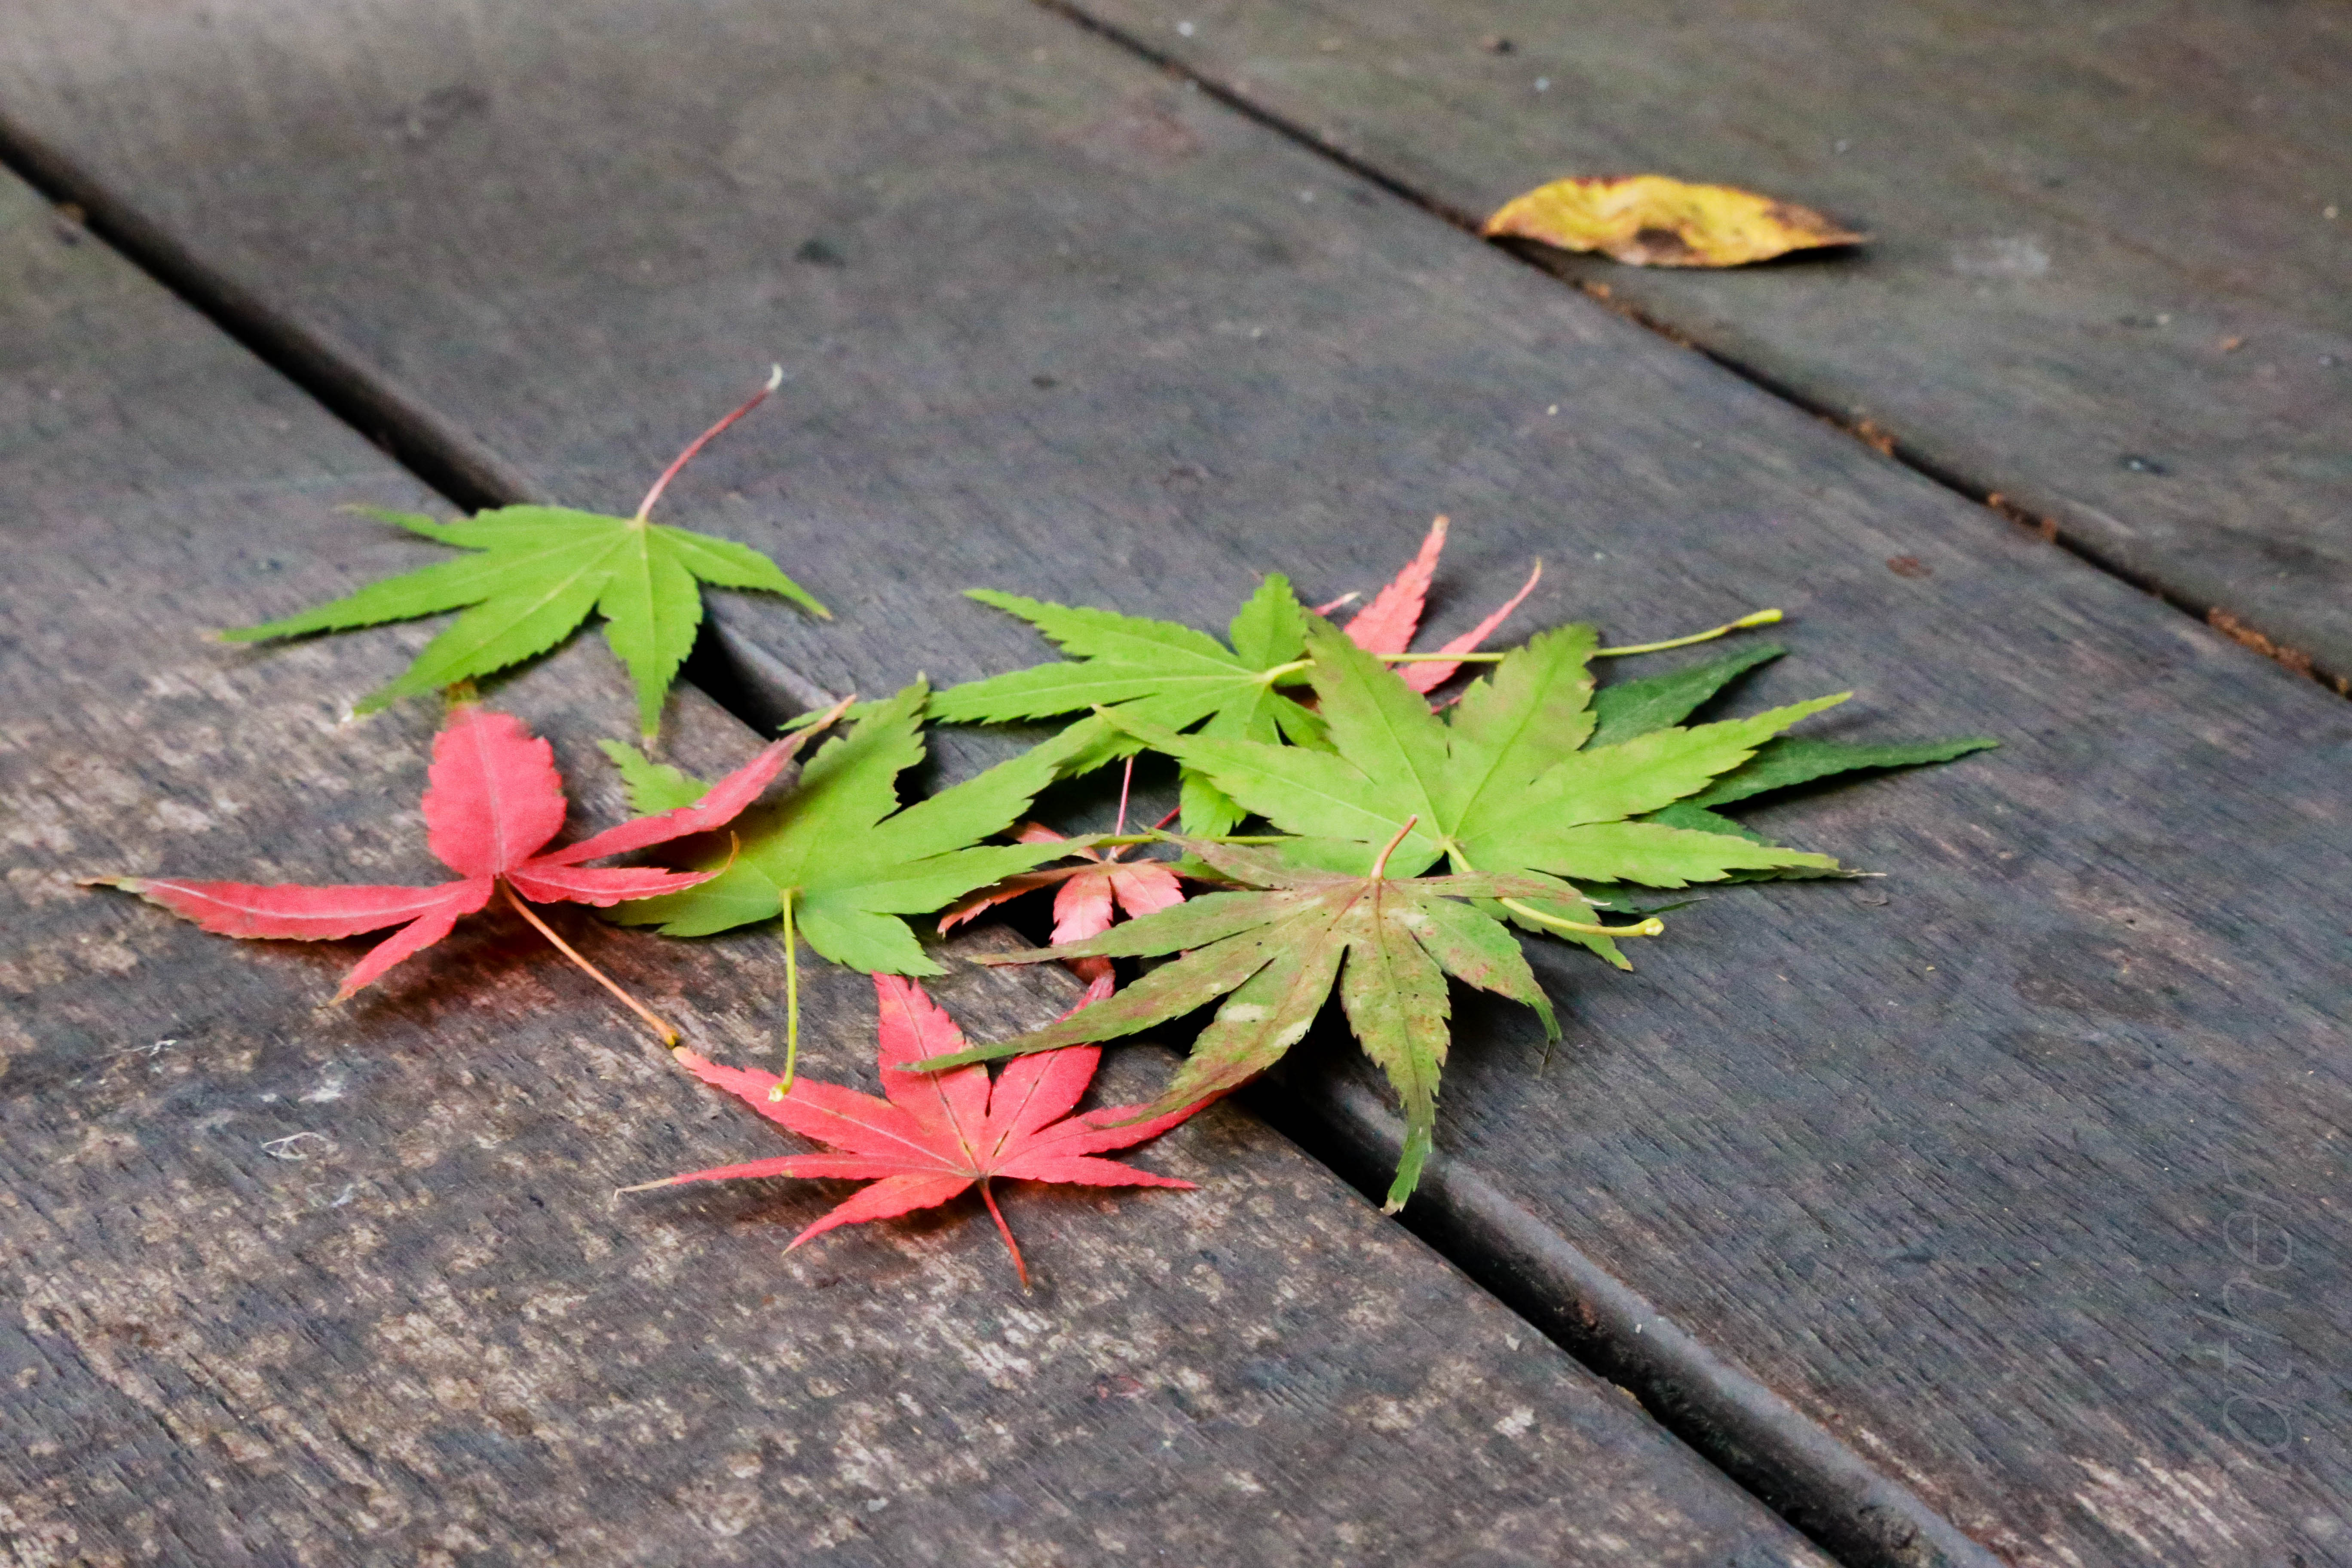 General 5472x3648 China nature leaves